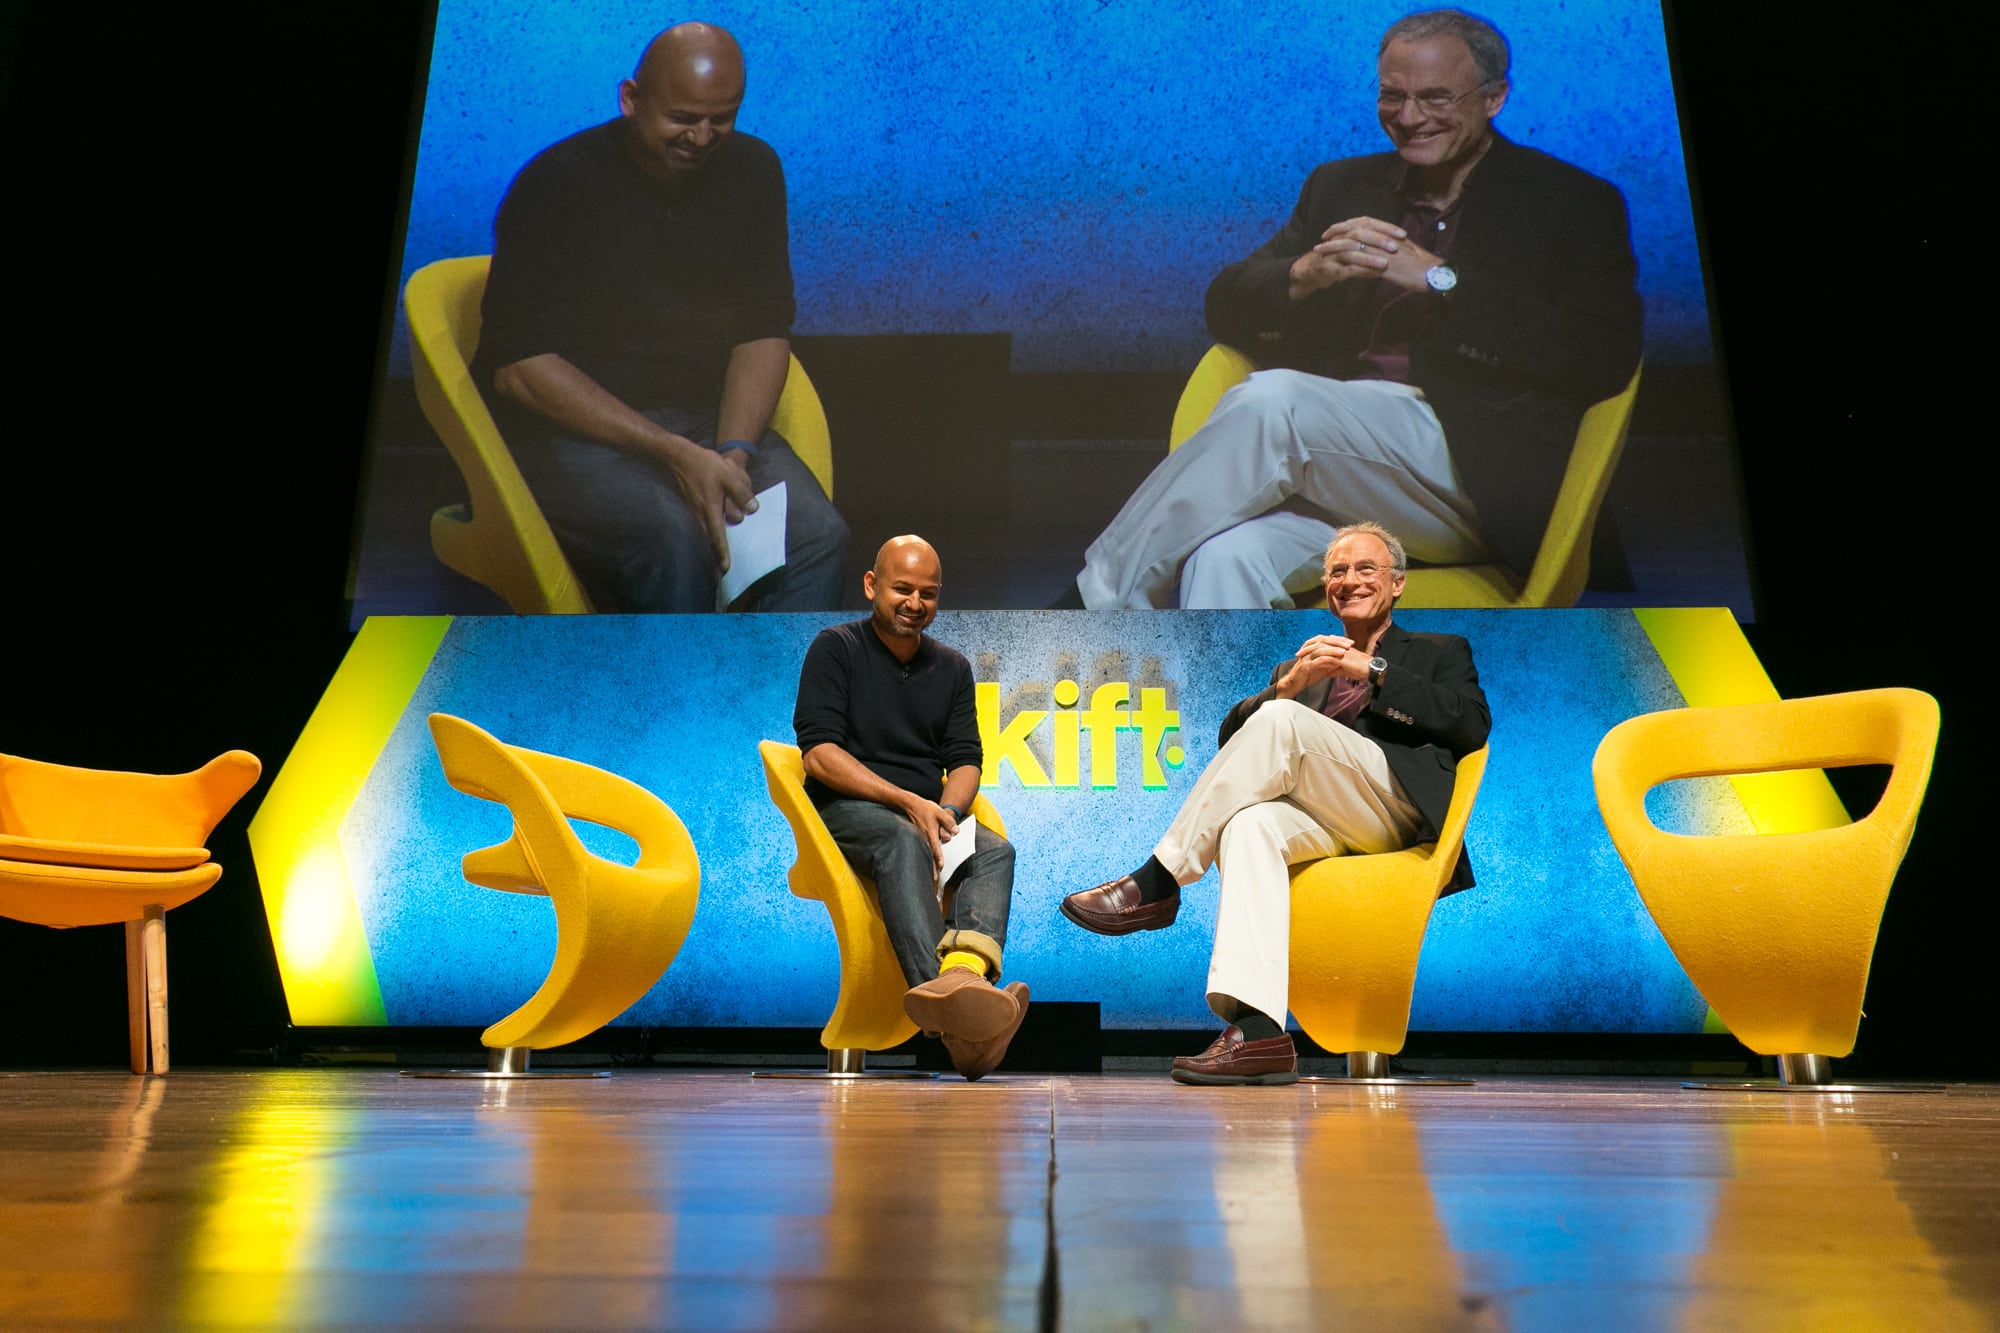 TripAdvisor co-founder and CEO Stephen Kaufer tells Skift founder and CEO Rafat Ali and the audience at the Skift Global Forum in Manhattan September 28 that he has a lot more work to do in the future at TripAdvisor to improve the traveler journey.